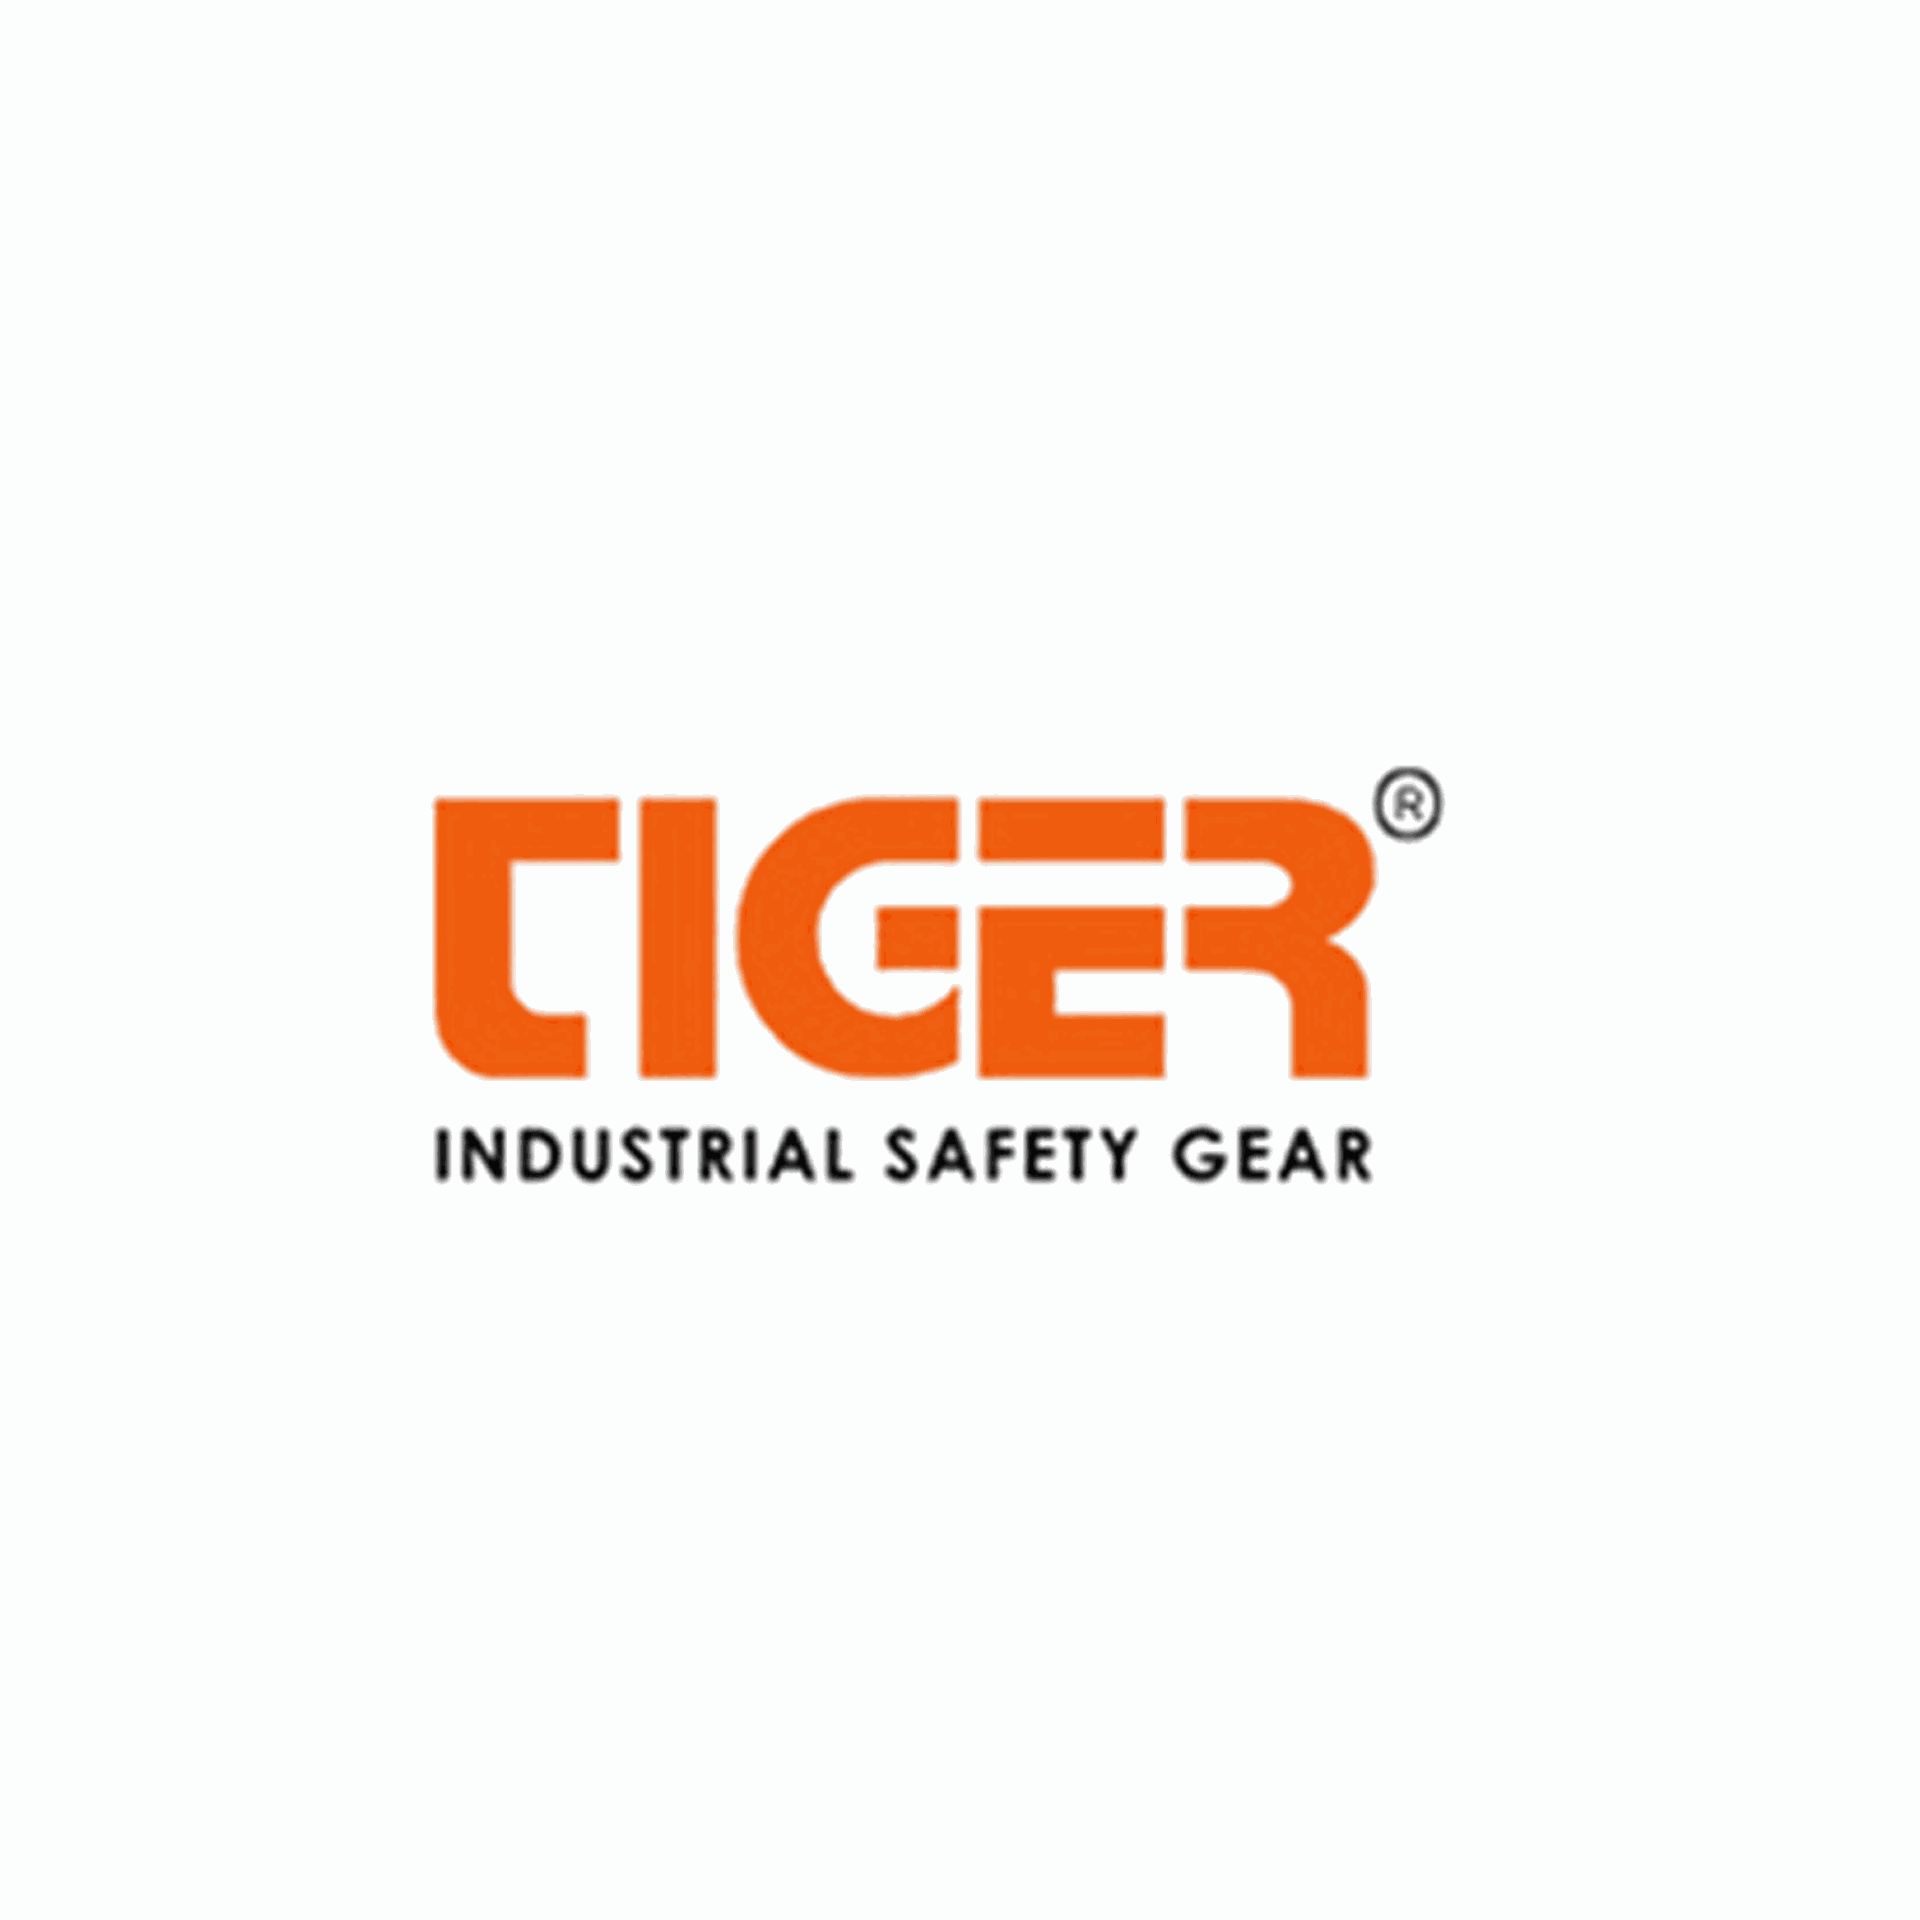 Product Brand: Tiger